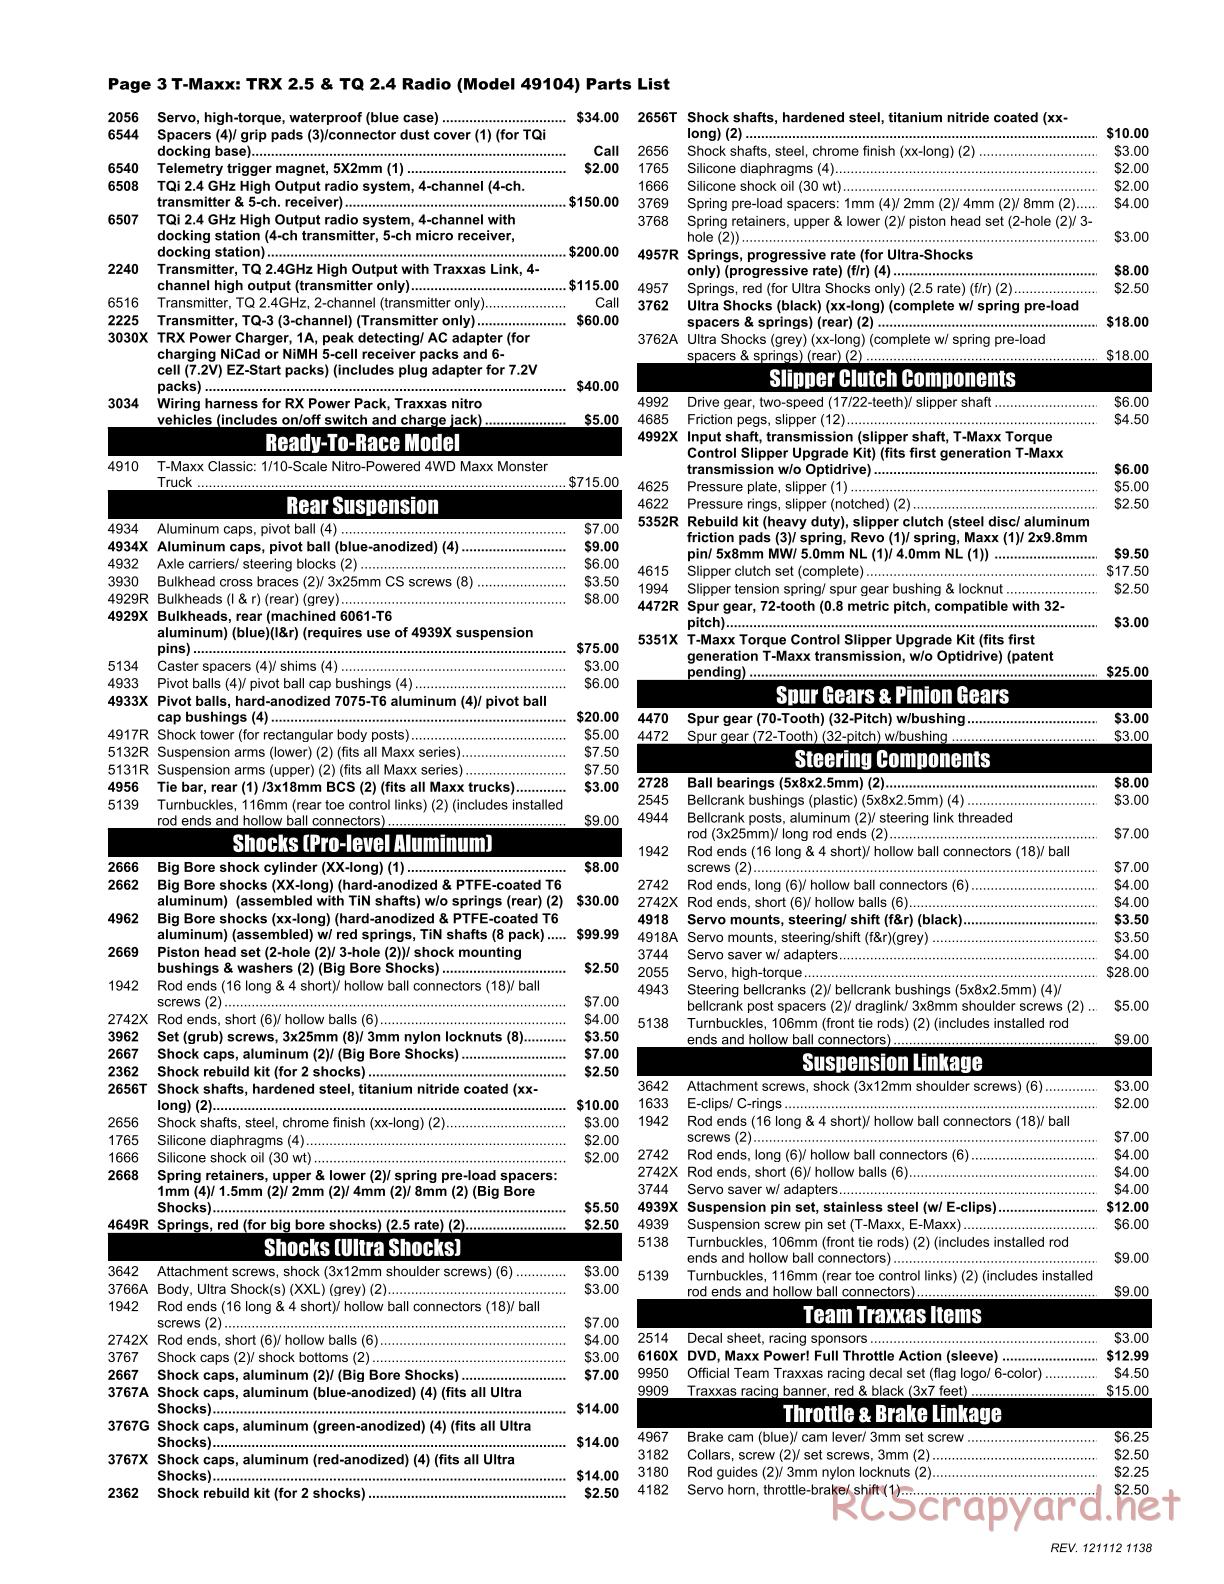 Traxxas - T-Maxx Classic (2013) - Parts List - Page 3